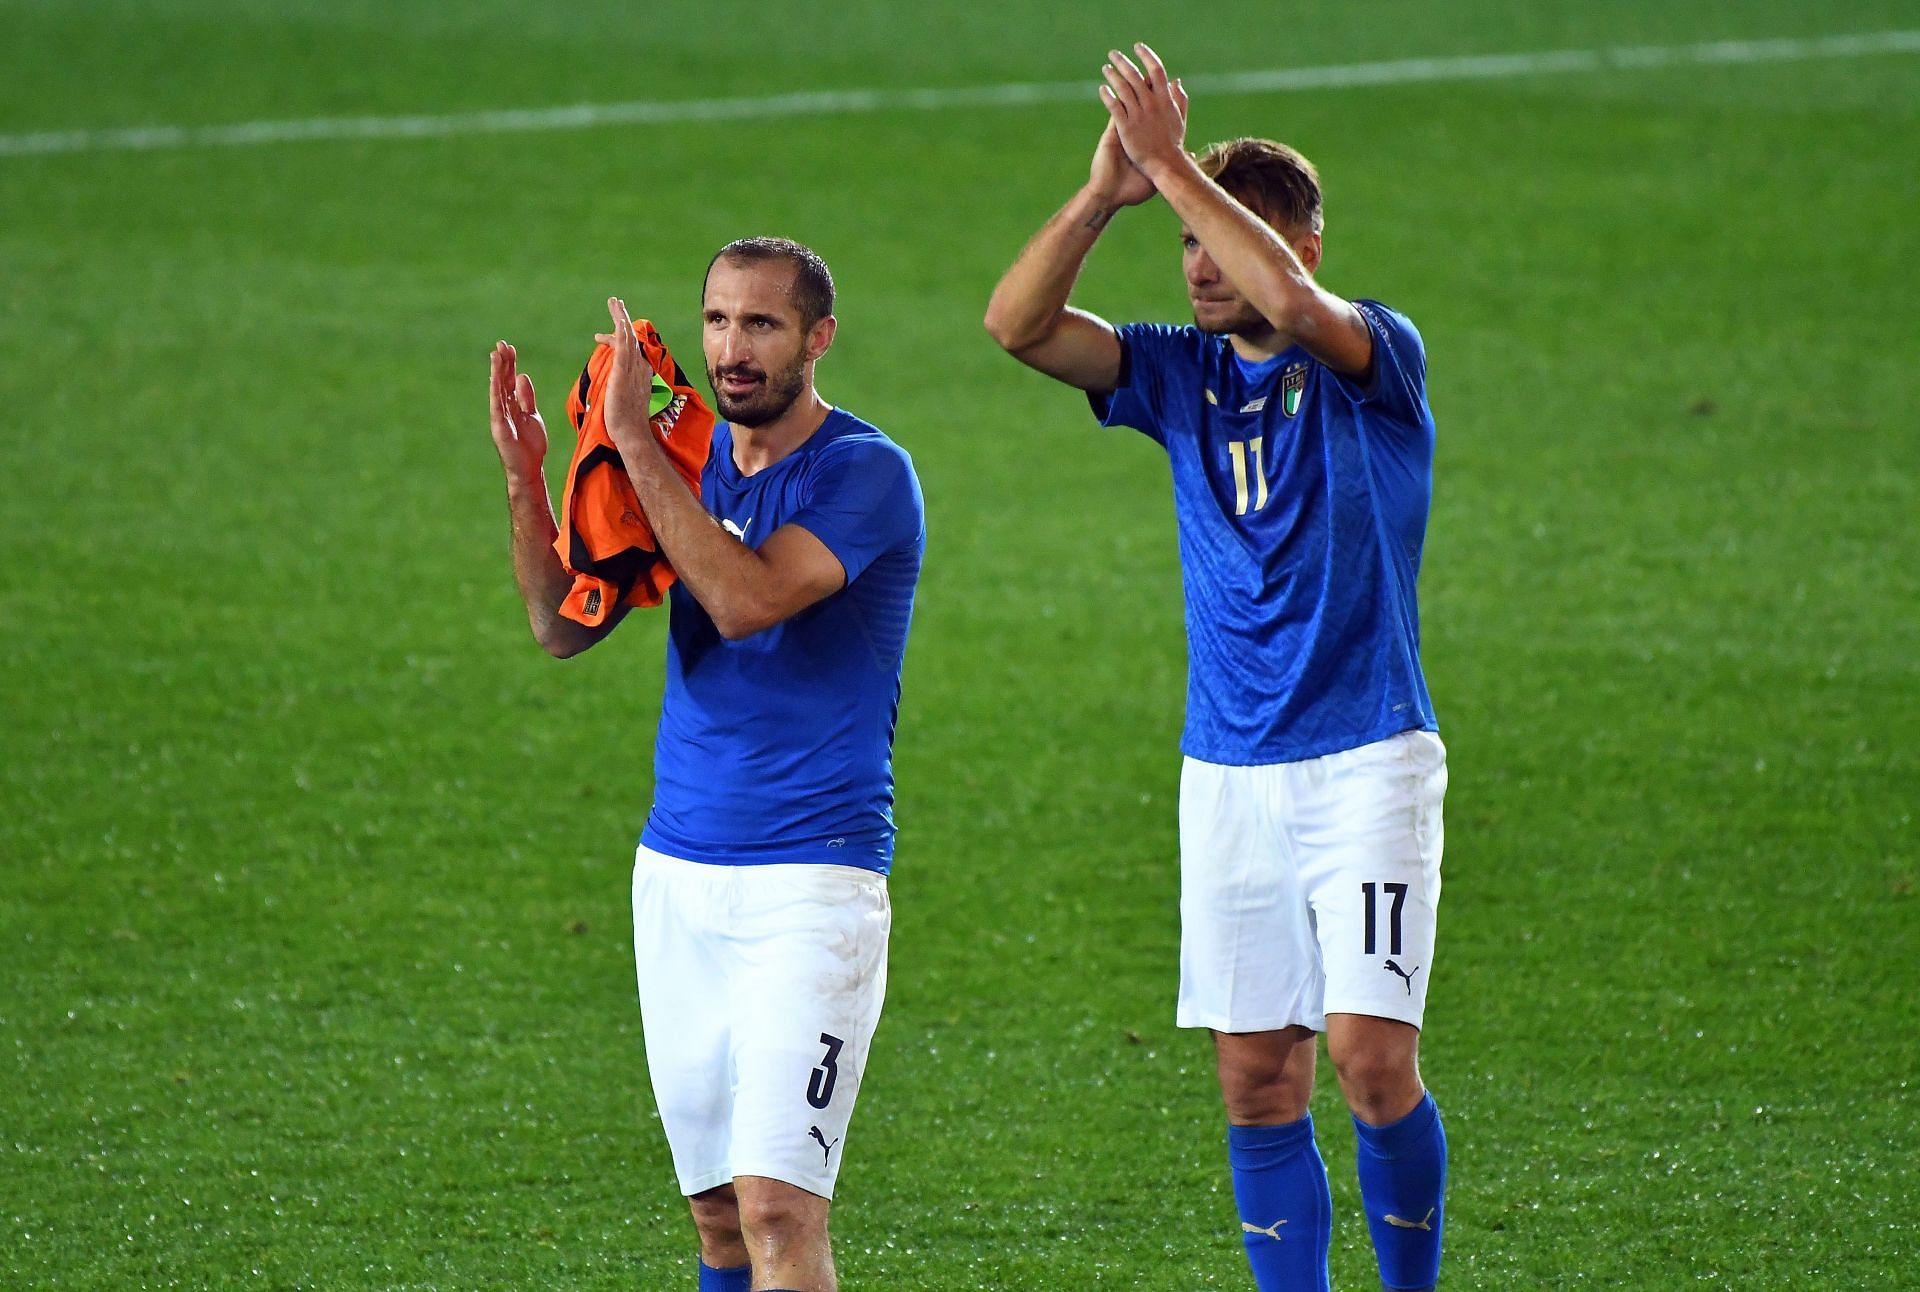 Italy have a depleted squad and have shifted focus towards younger players